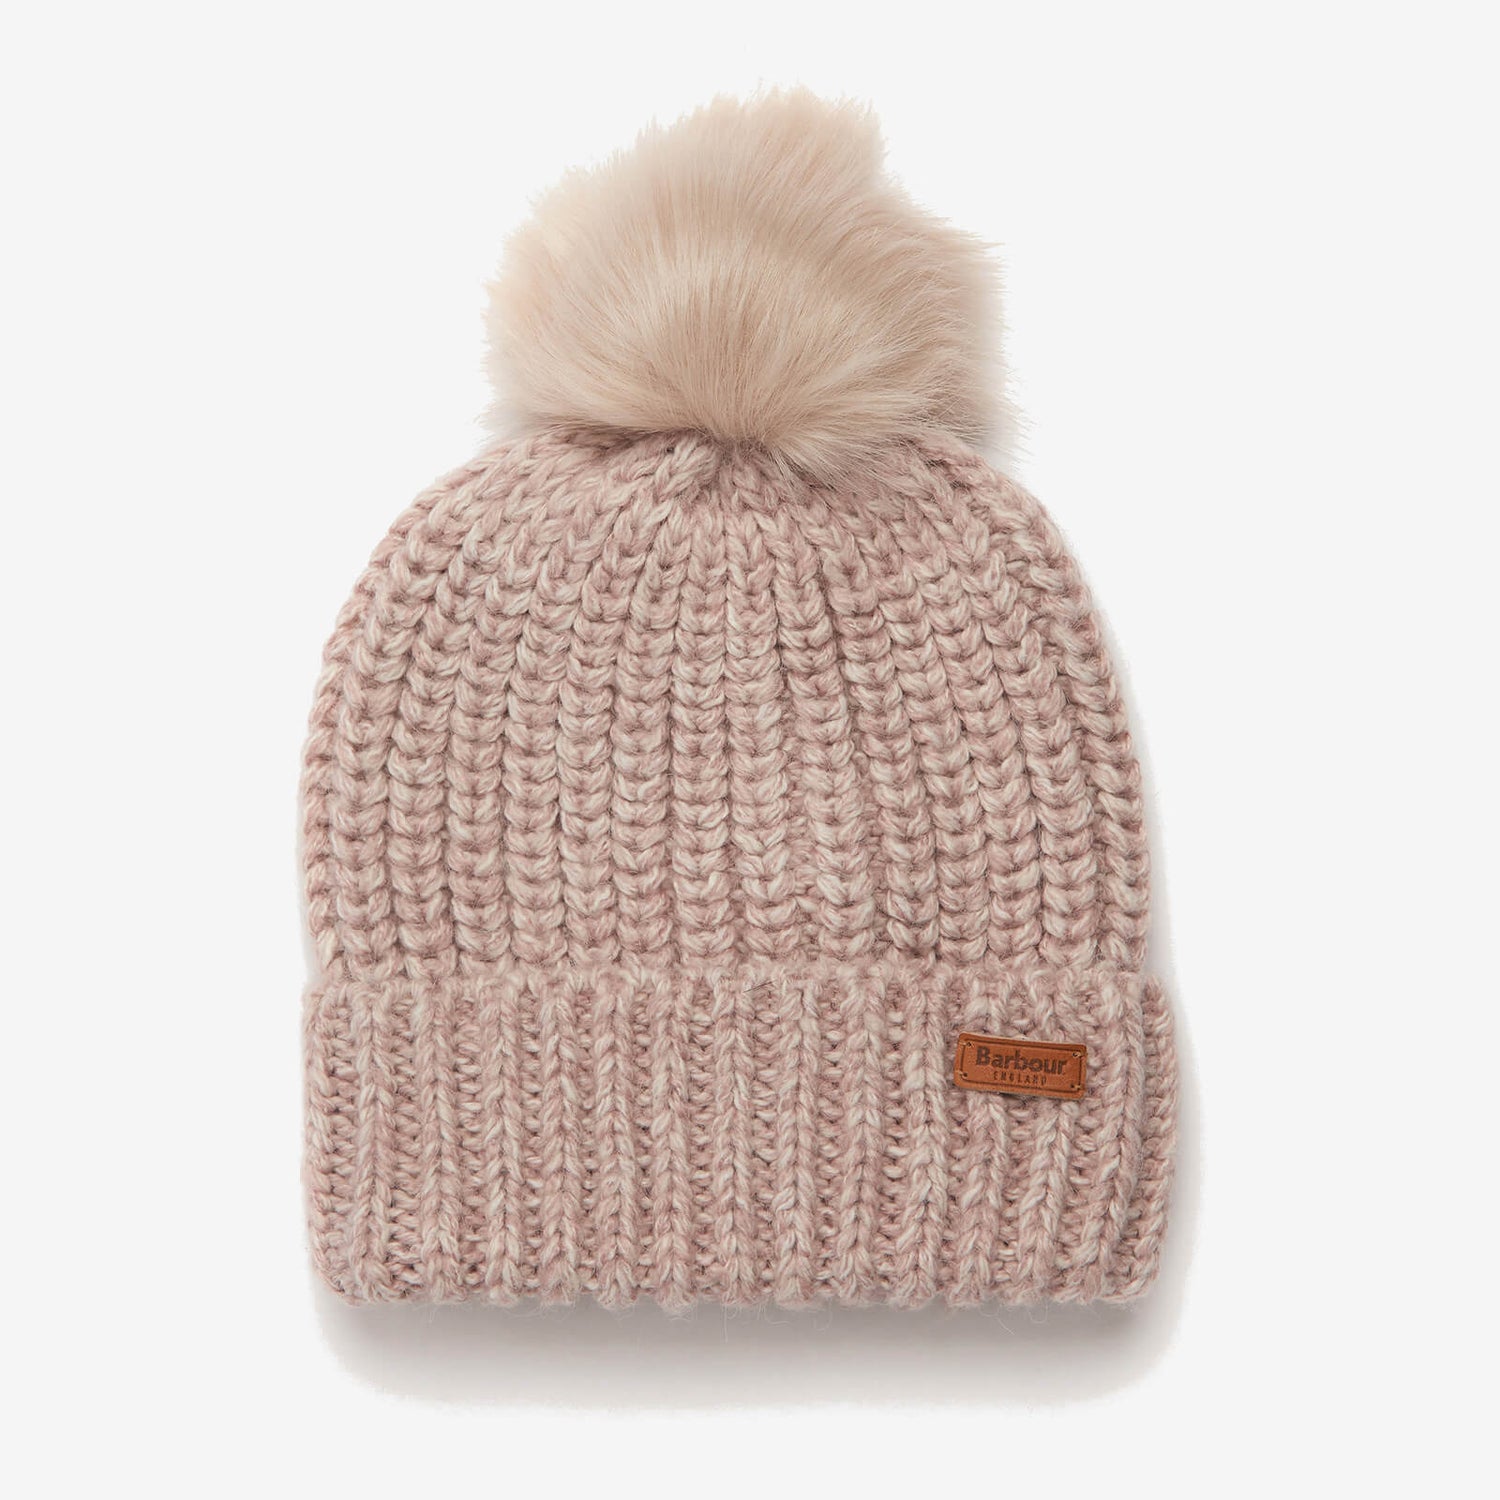 Barbour Women's Barbour Rothbury Beanie - Pale Pink